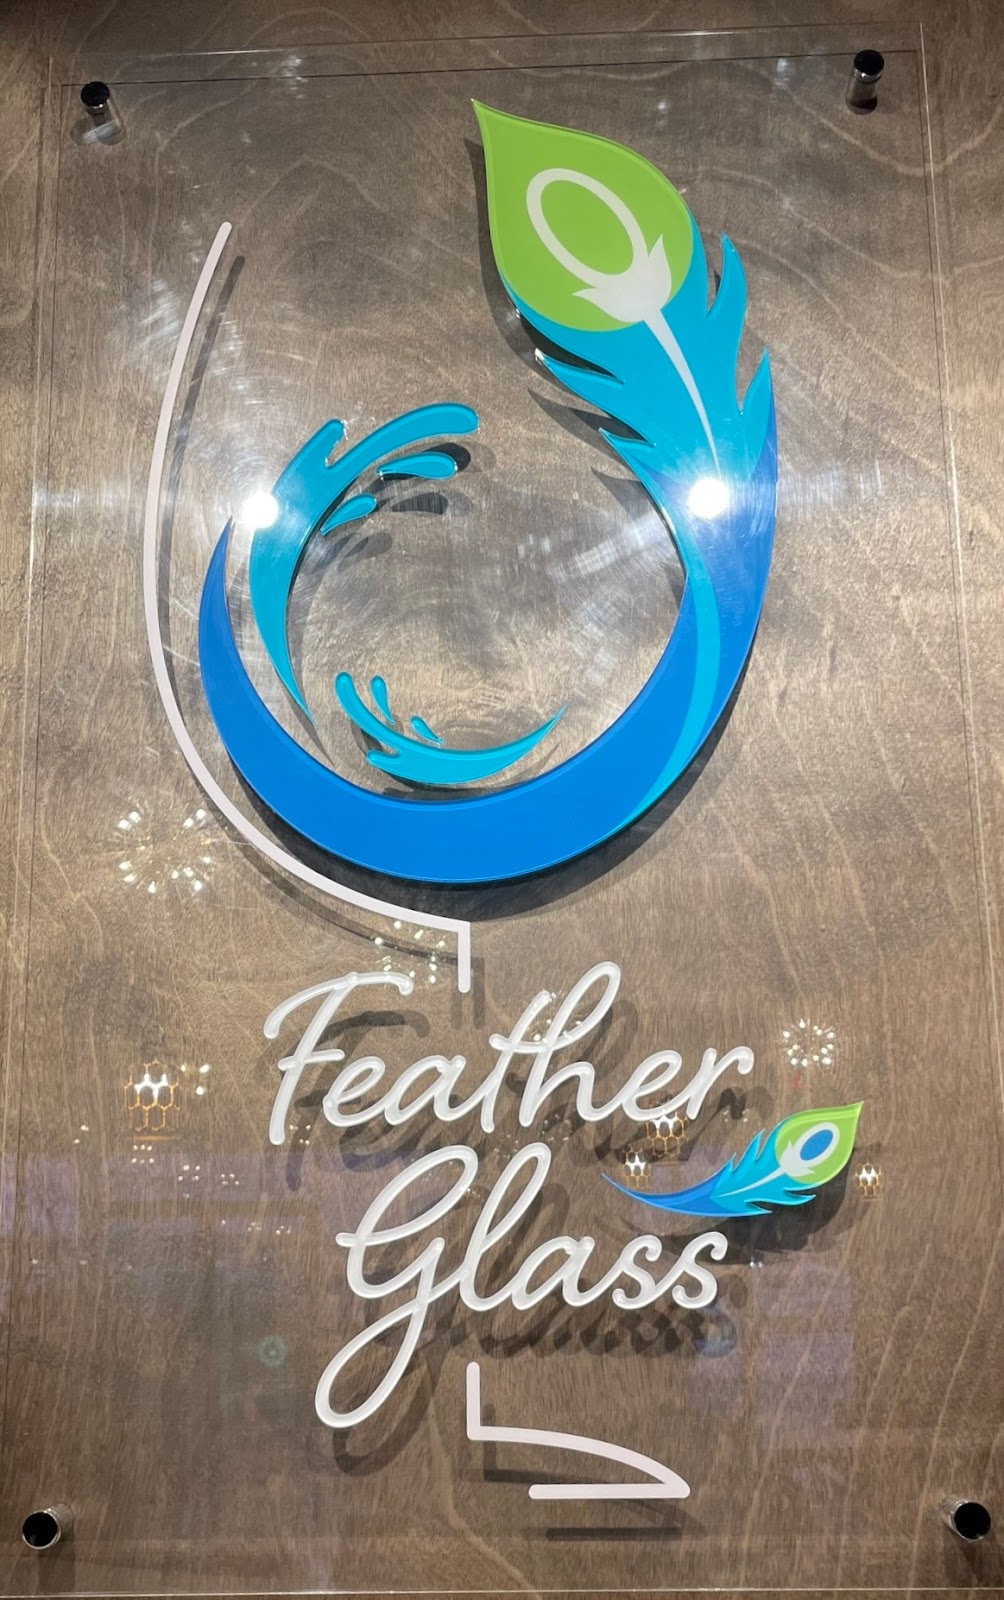 Feather Glass Wine Bar & Eatery | restaurant | 700 N Milwaukee Ave #130, Vernon Hills, IL 60061, USA | 8477948182 OR +1 847-794-8182